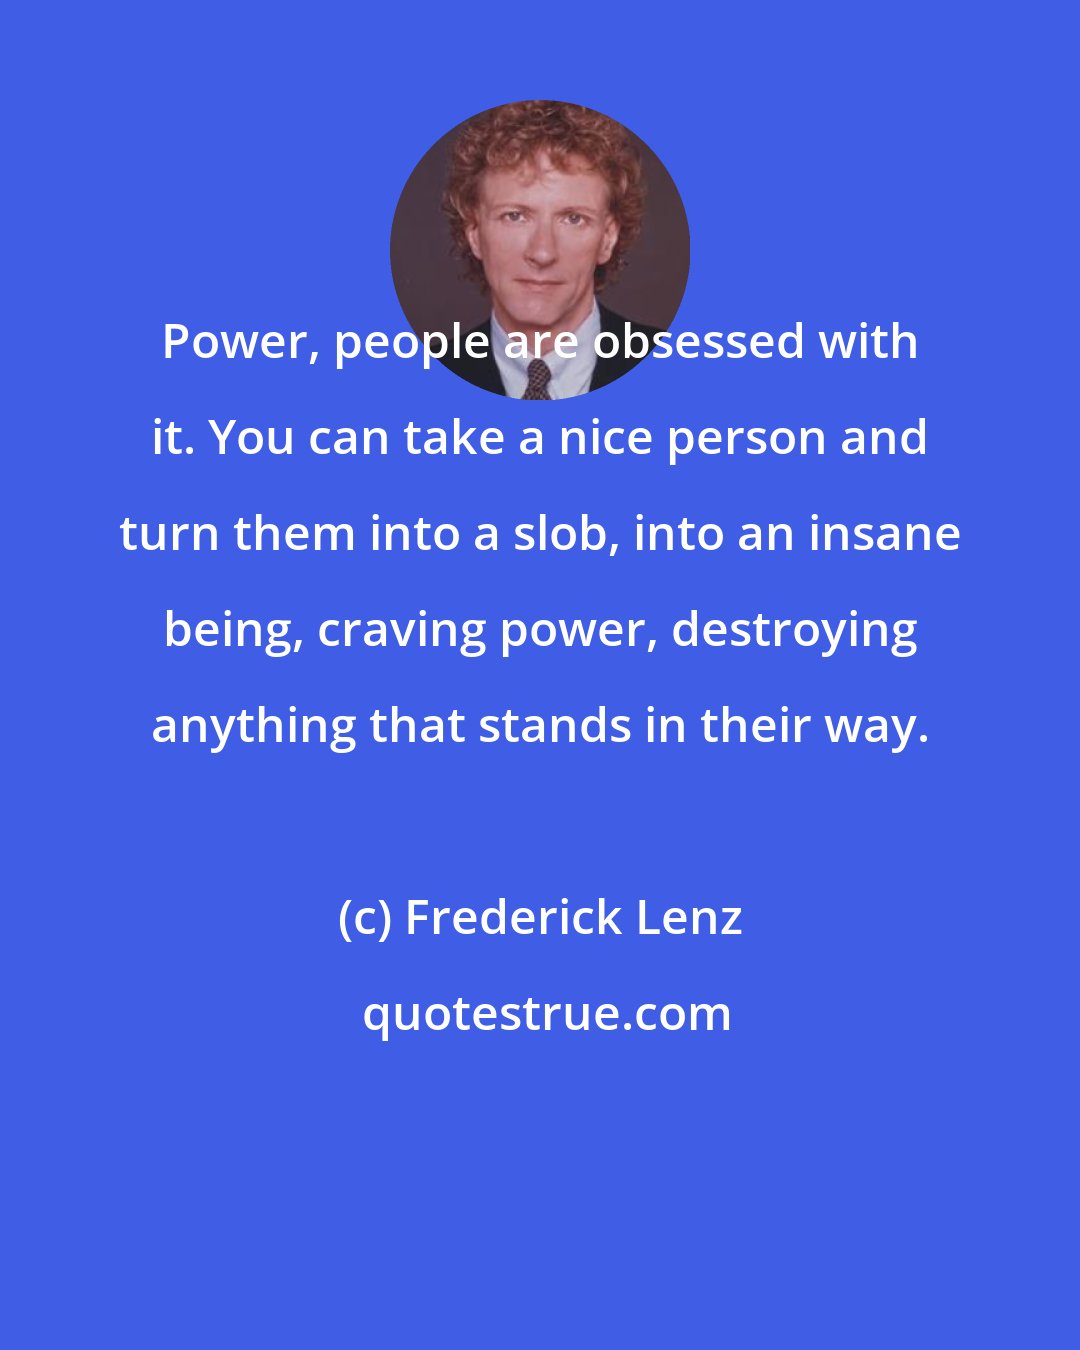 Frederick Lenz: Power, people are obsessed with it. You can take a nice person and turn them into a slob, into an insane being, craving power, destroying anything that stands in their way.